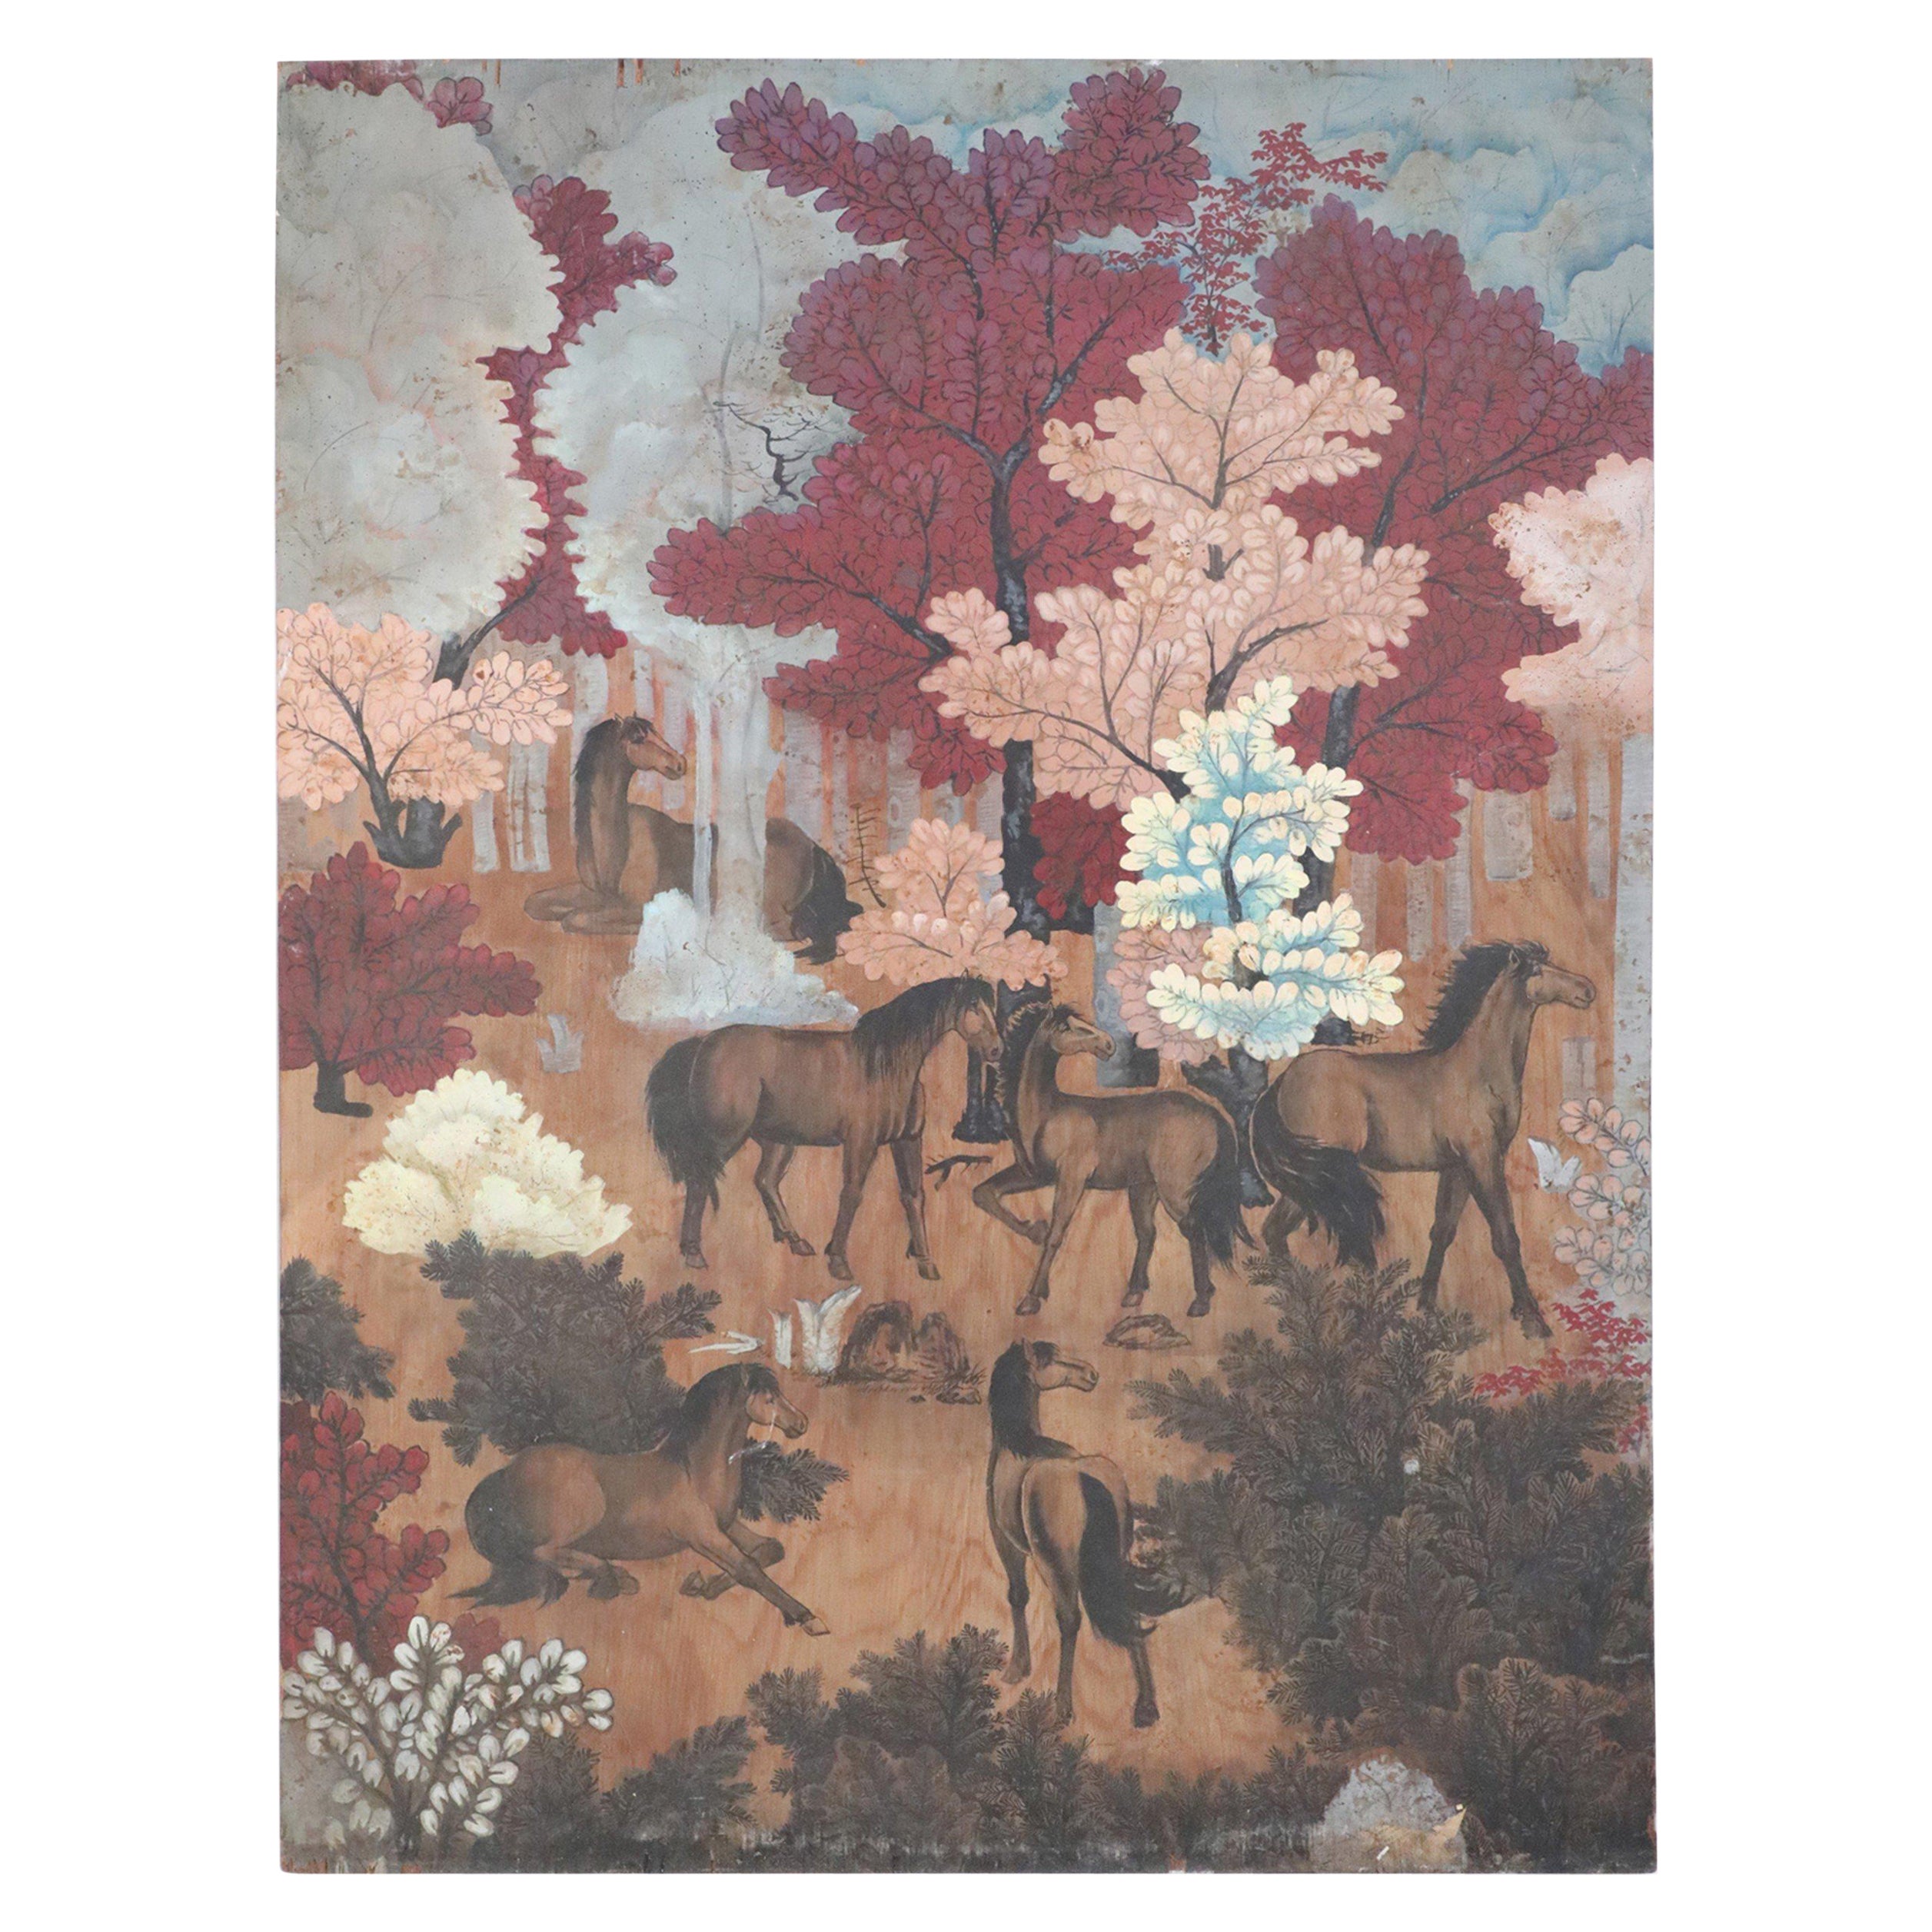 Horses in Autumn Forest Painting on Wood